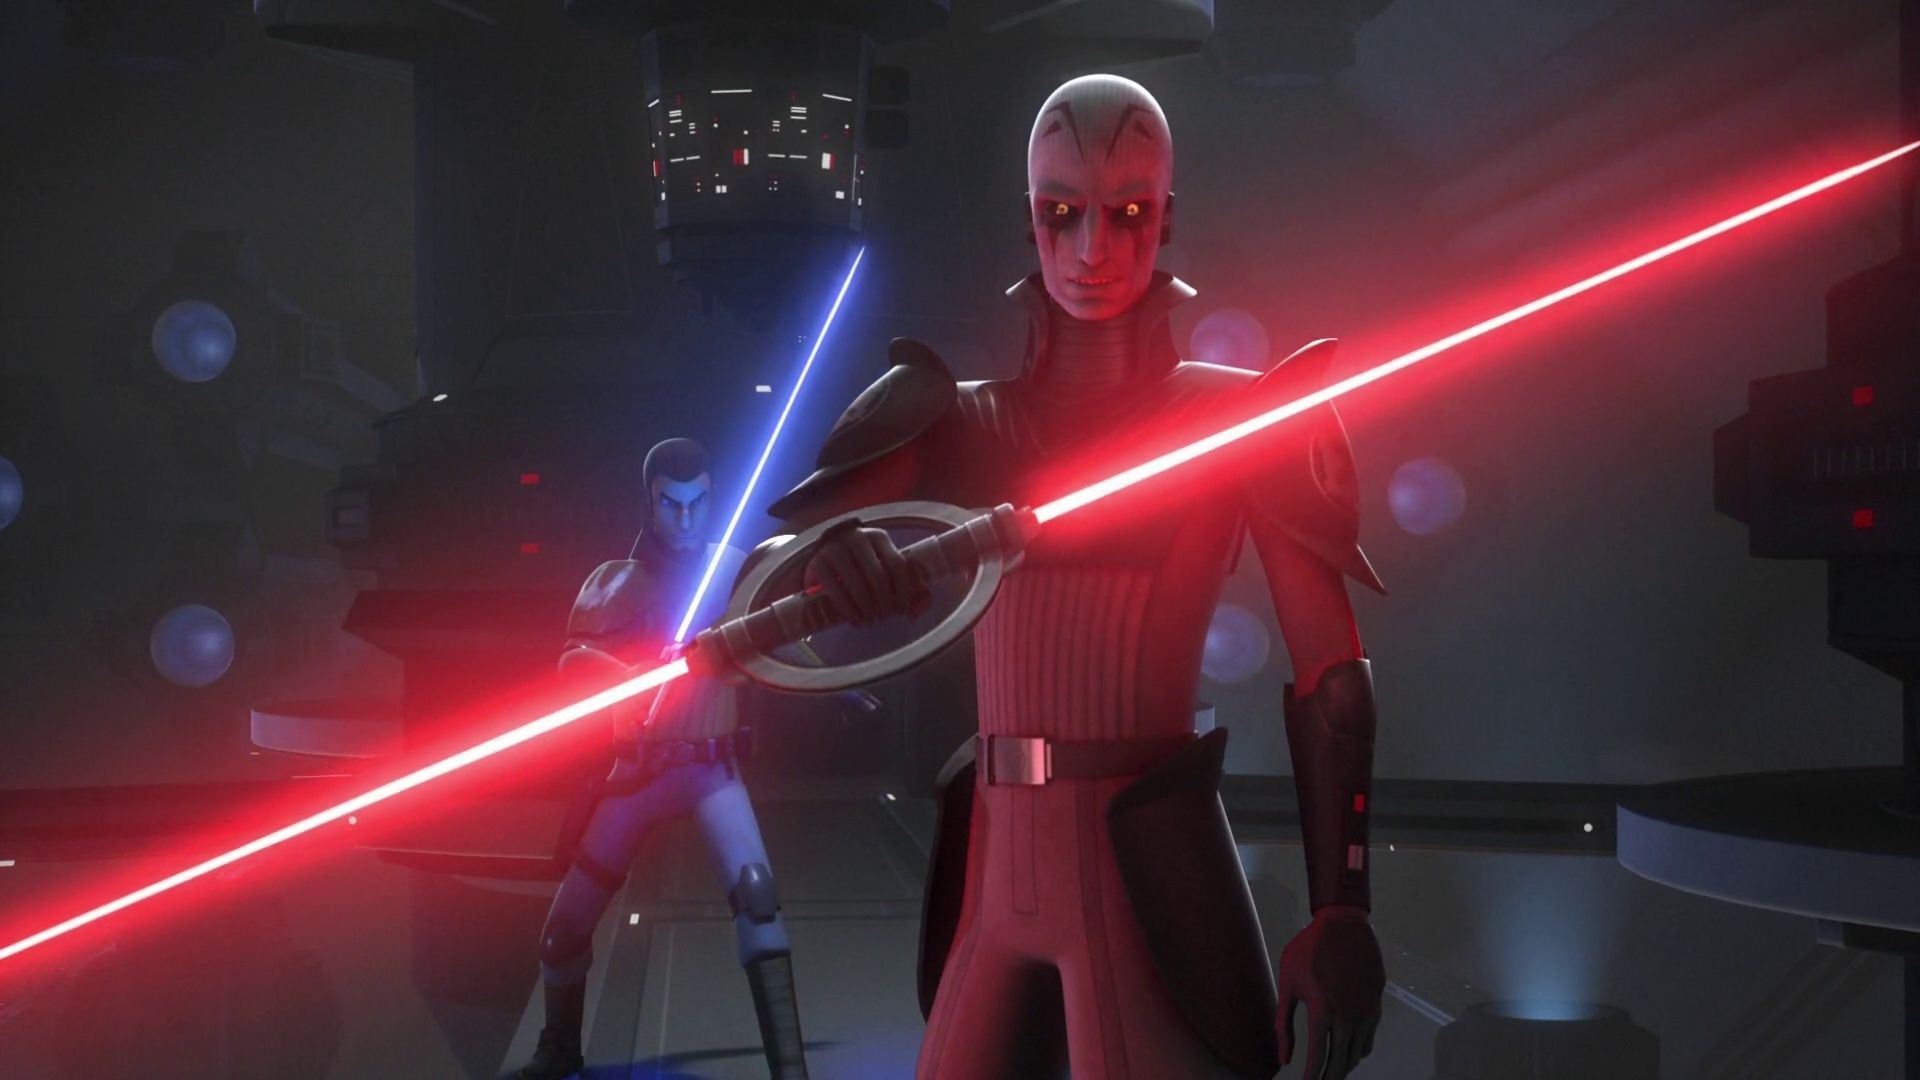 Star Wars Rebels: The Inquisitors